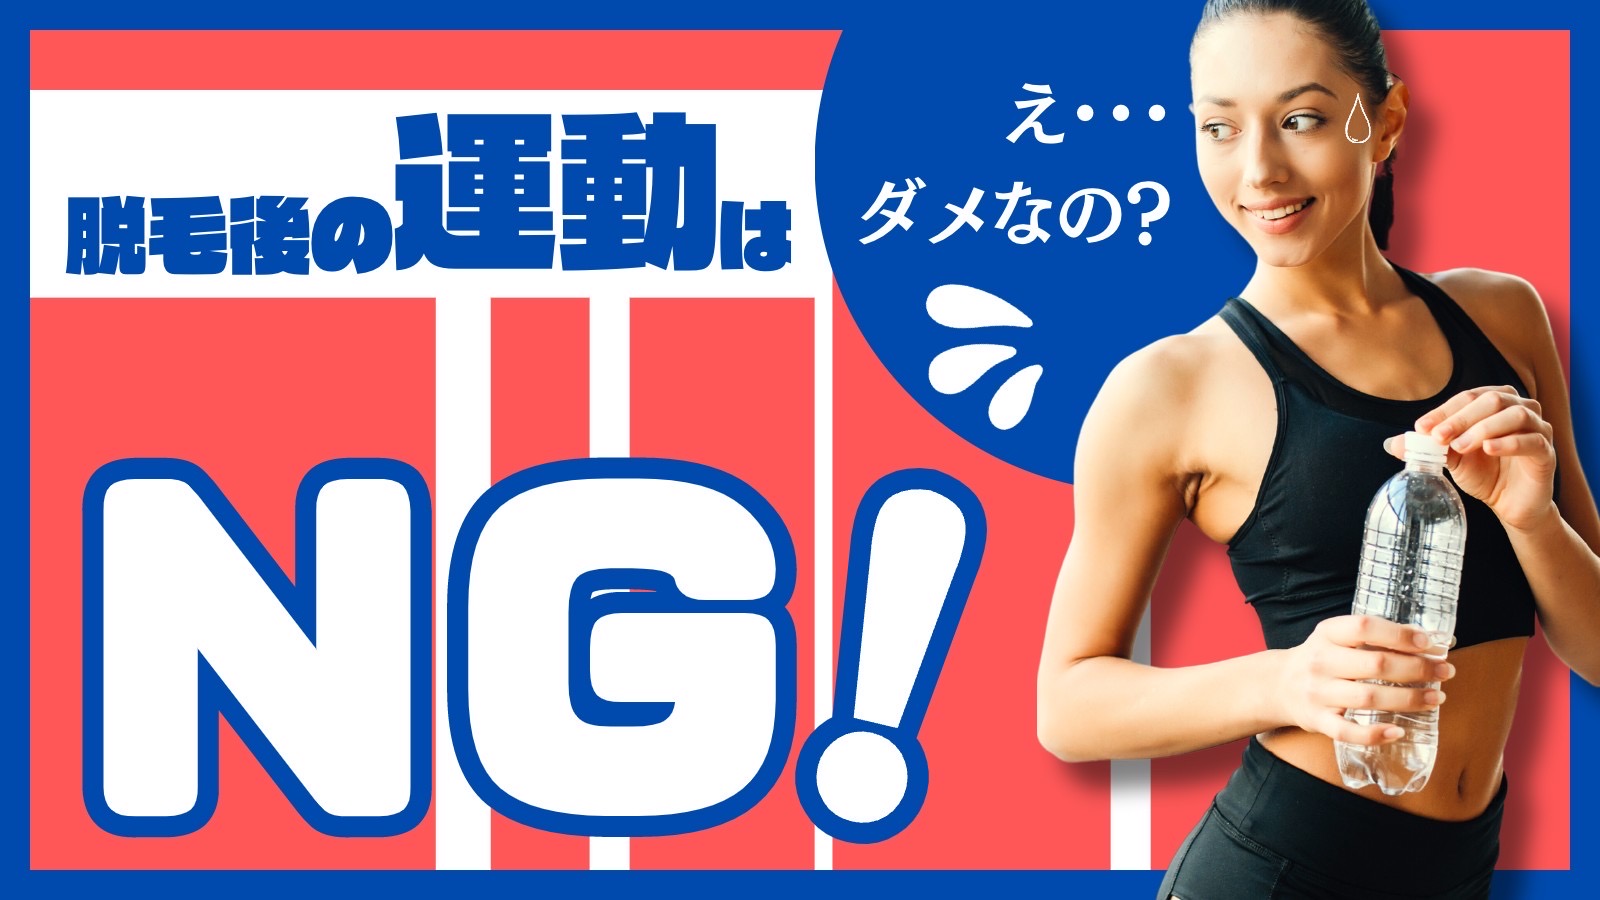 Read more about the article 脱毛後の運動はNG！うっかり運動してしまった場合のお助け方法を解説！